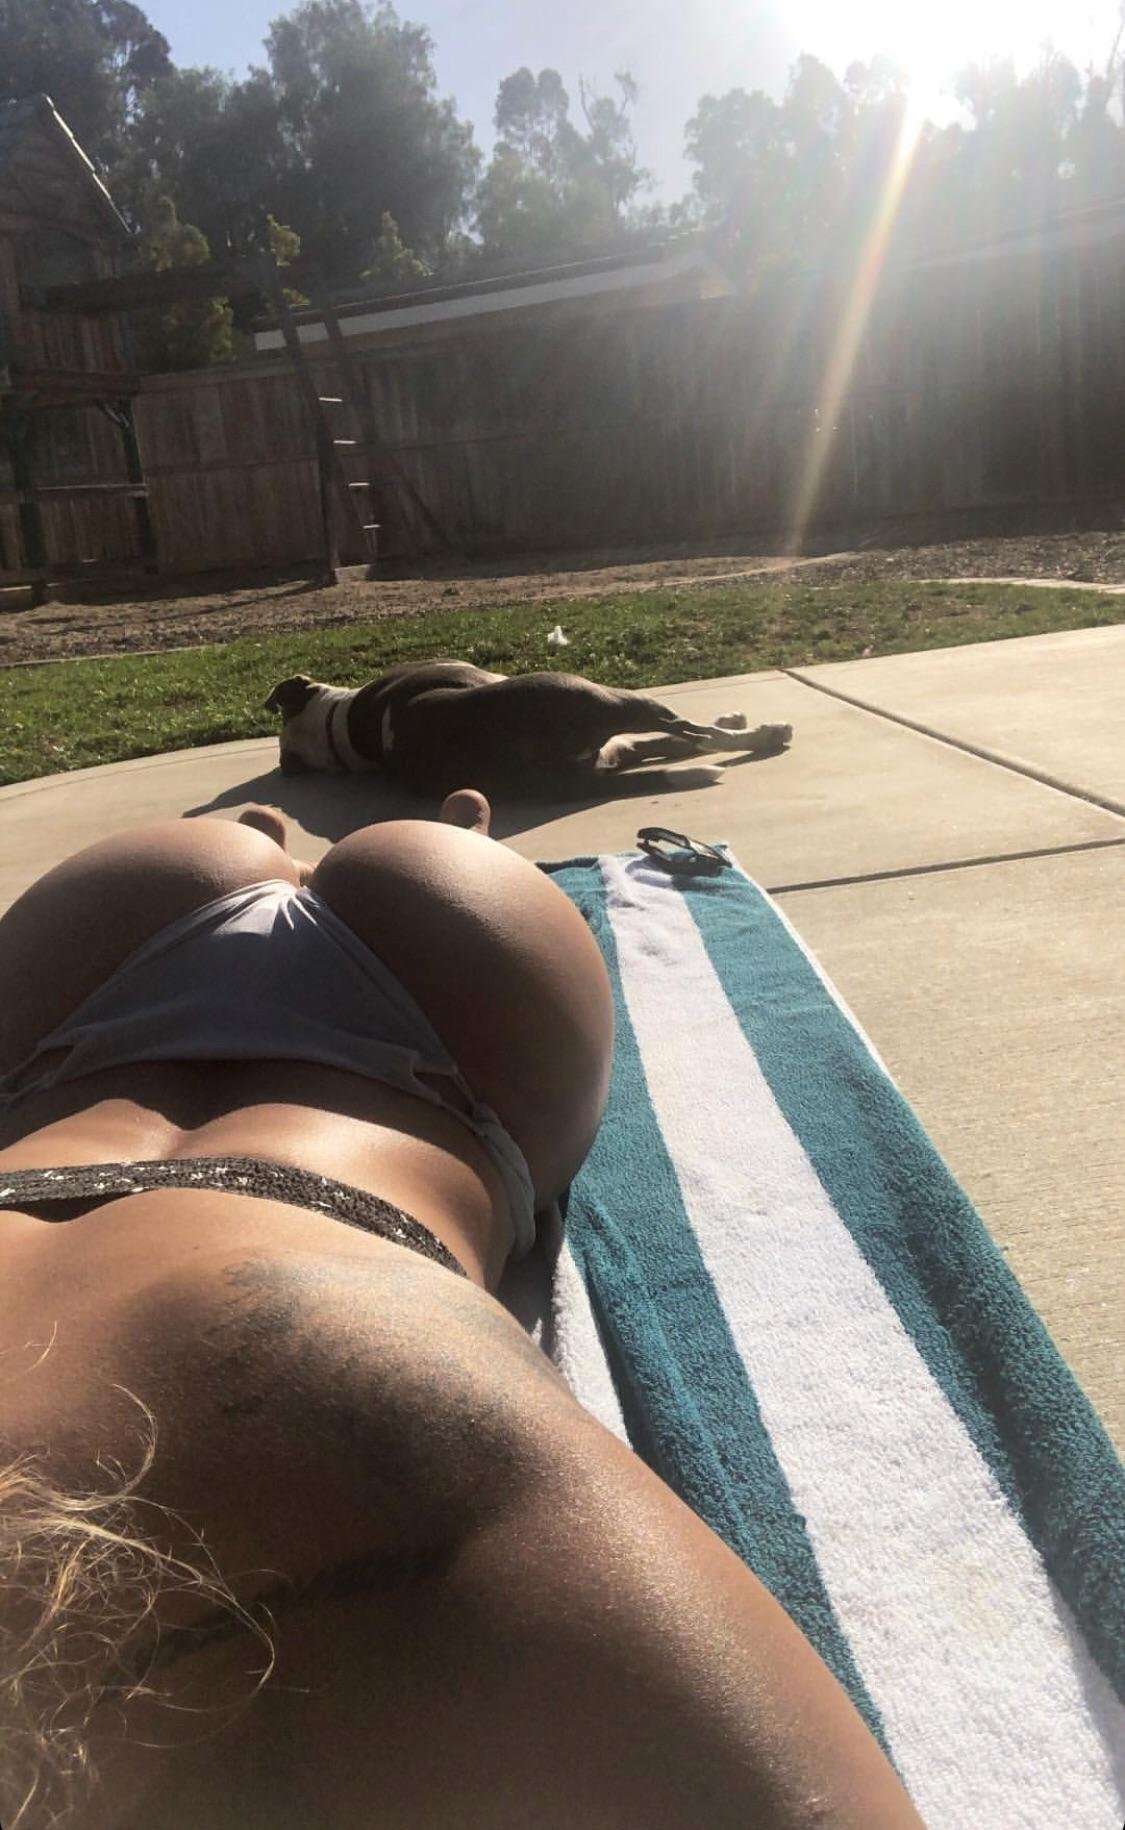 Suns out cheeks out